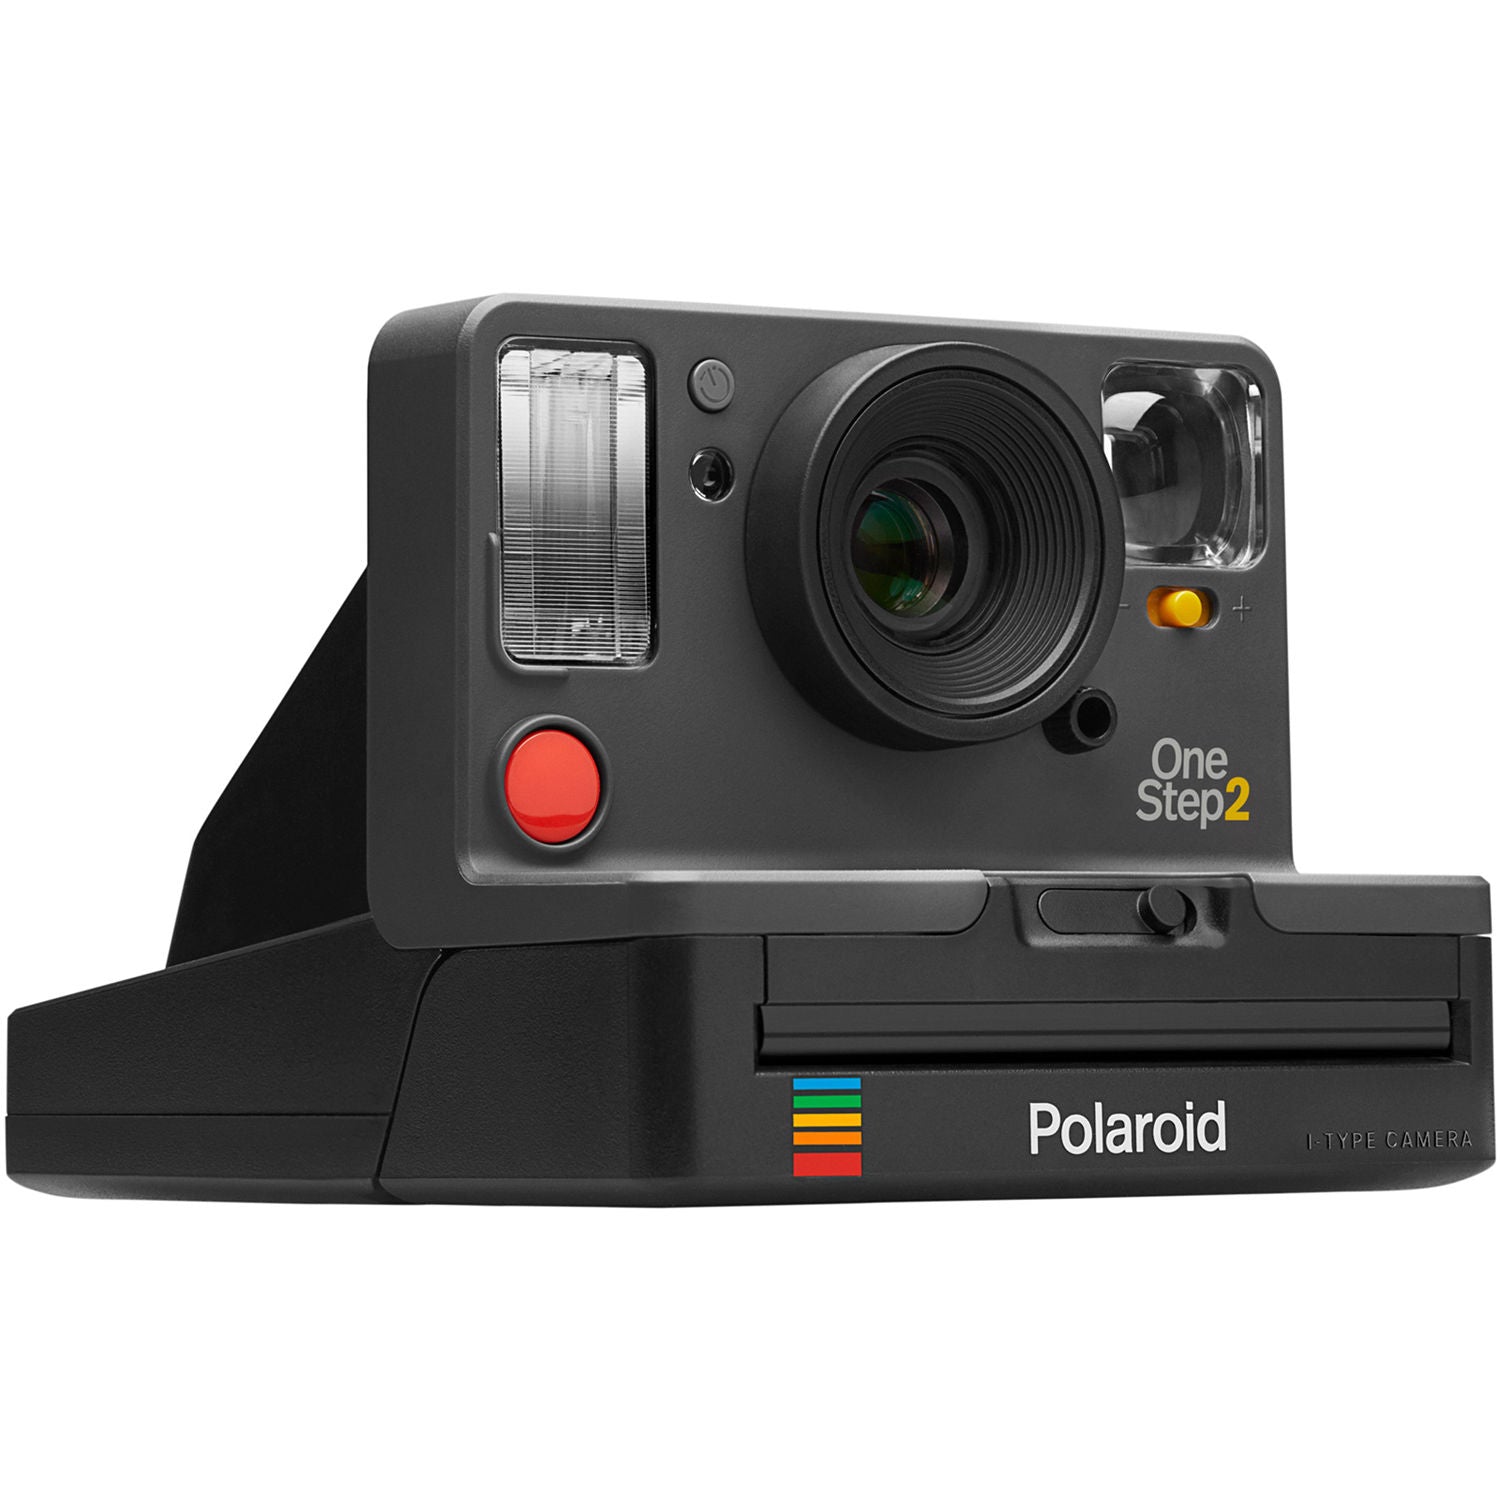 reparatie dwaas Lima Buy Polaroid Cameras & Film in NYC at The Imaging World in Brooklyn – Buy  in NYC or online at The Imaging World in Brooklyn